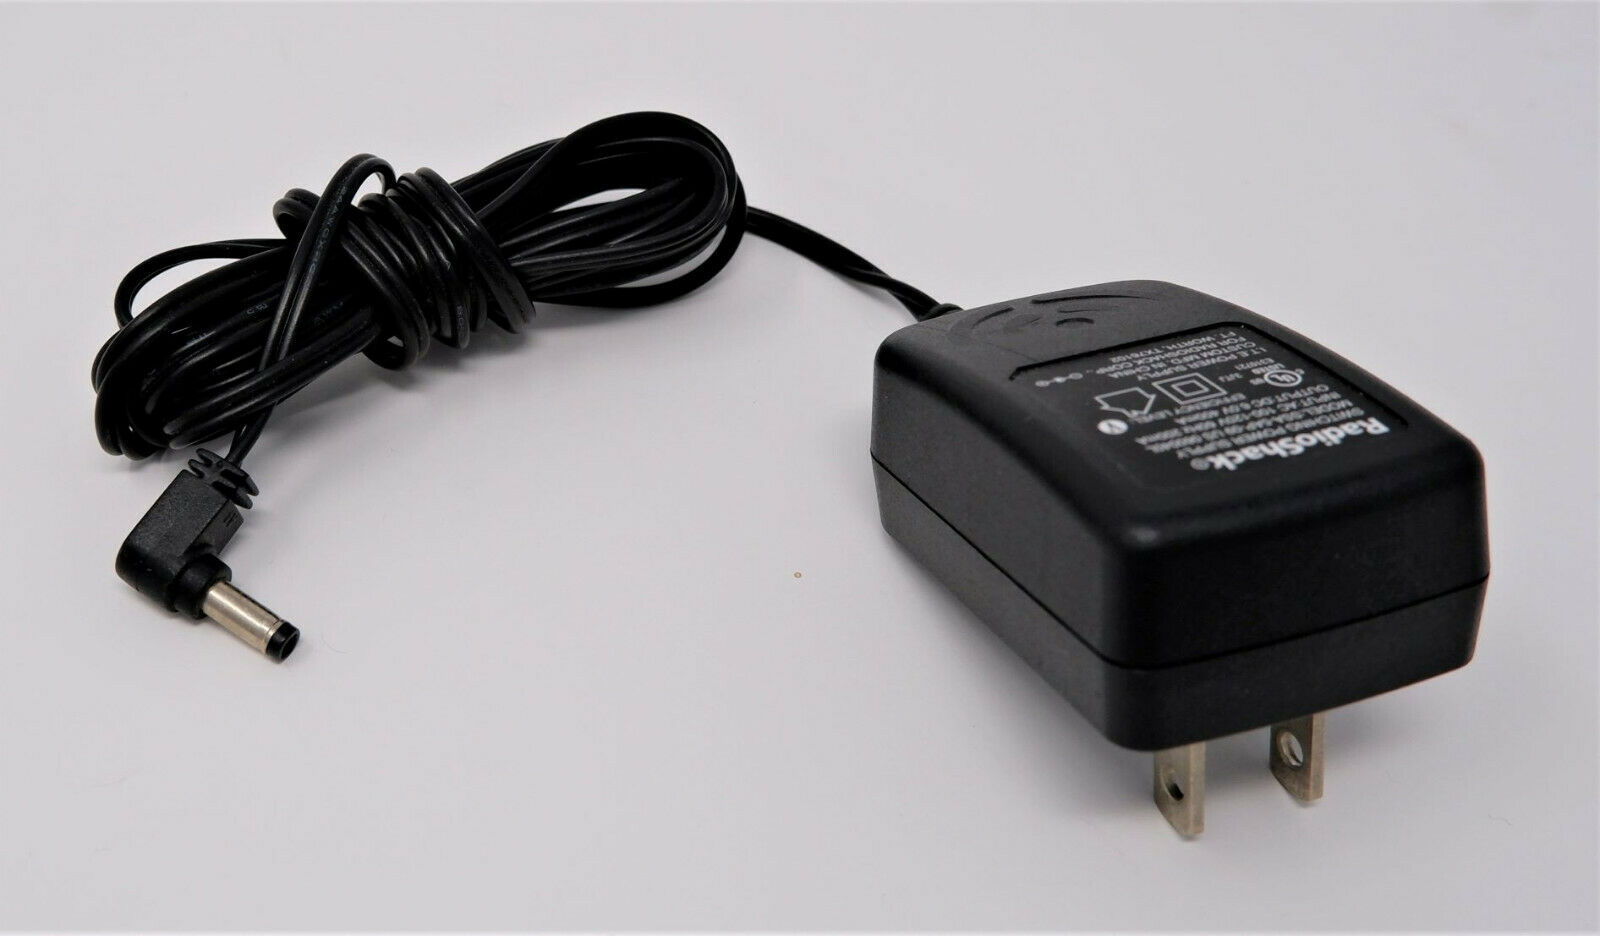 RADIO SHACK SSA-5AP-08 US 0600040L 6V 400MA AC ADAPTER FOR PHONES OR MORE - NEW Model: SSA-5AP-08 US 0600040L Type: